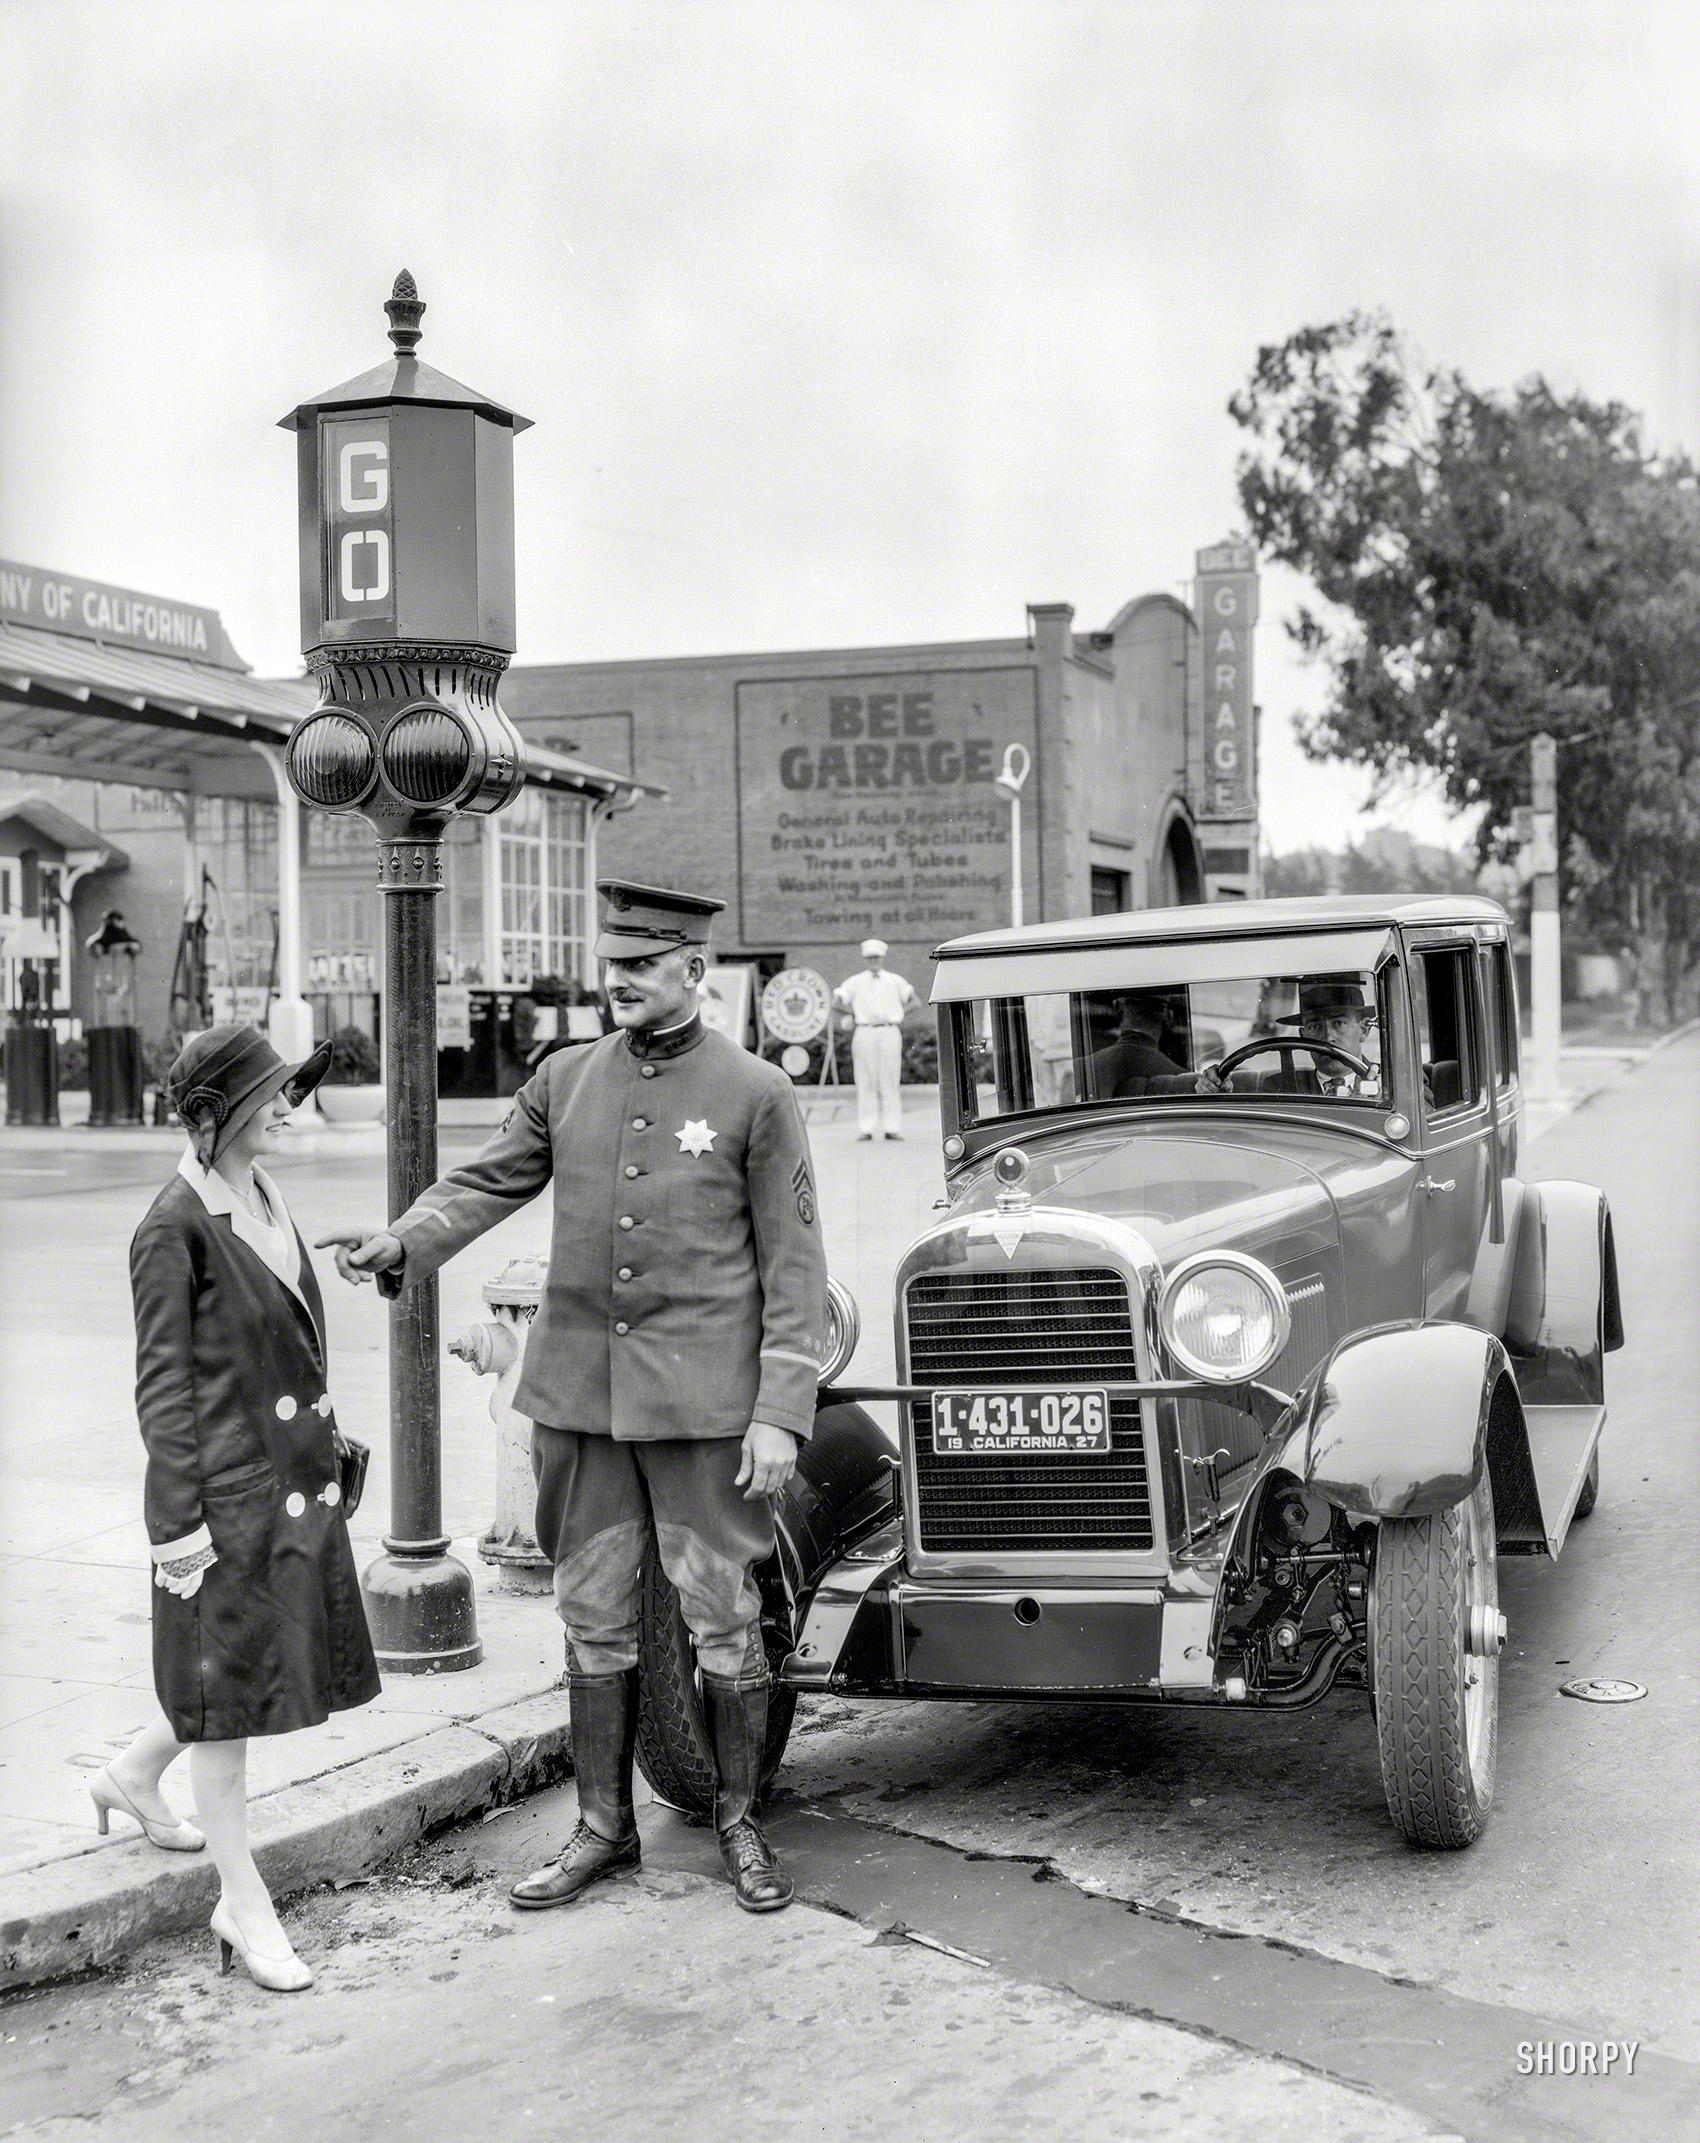 San Francisco, 1927. "Traffic signals -- police officer stops pedestrian crossing against the light in front of Hudson sedan at Bee Garage service station." 8x10 film negative, originally from the Wyland Stanley collection. View full size.